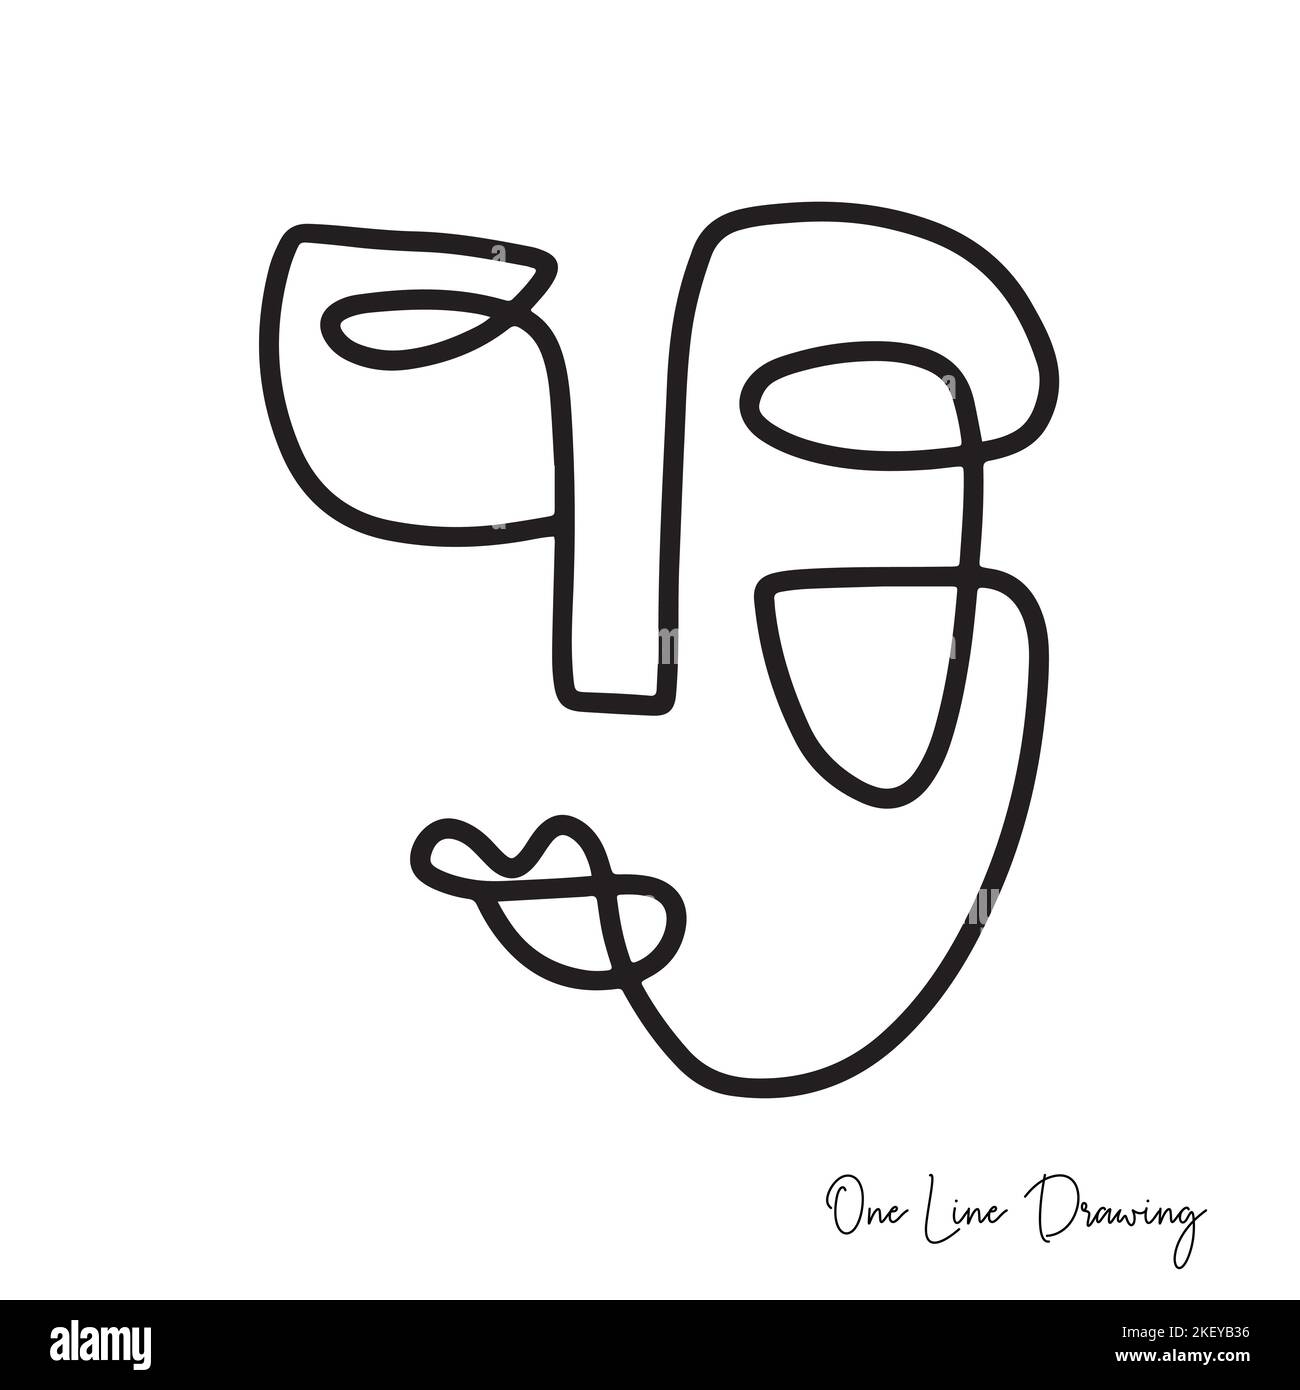 Fashion Cubism One line drawing human face with organic shapes Stock Vector